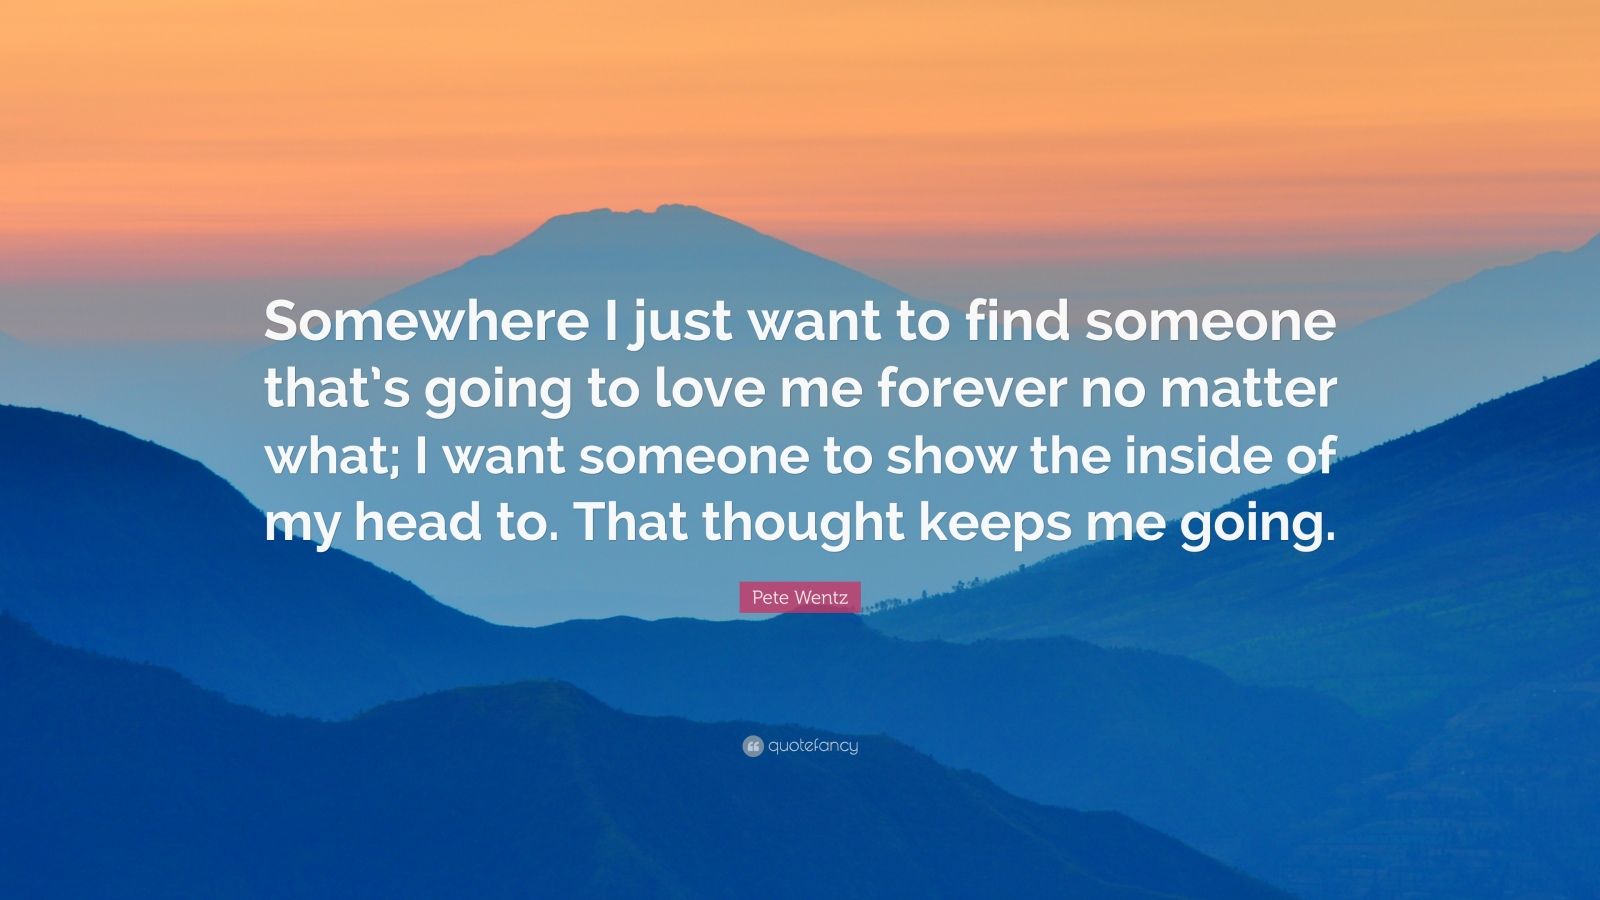 Pete Wentz Quote “Somewhere I just want to find someone that s going to love